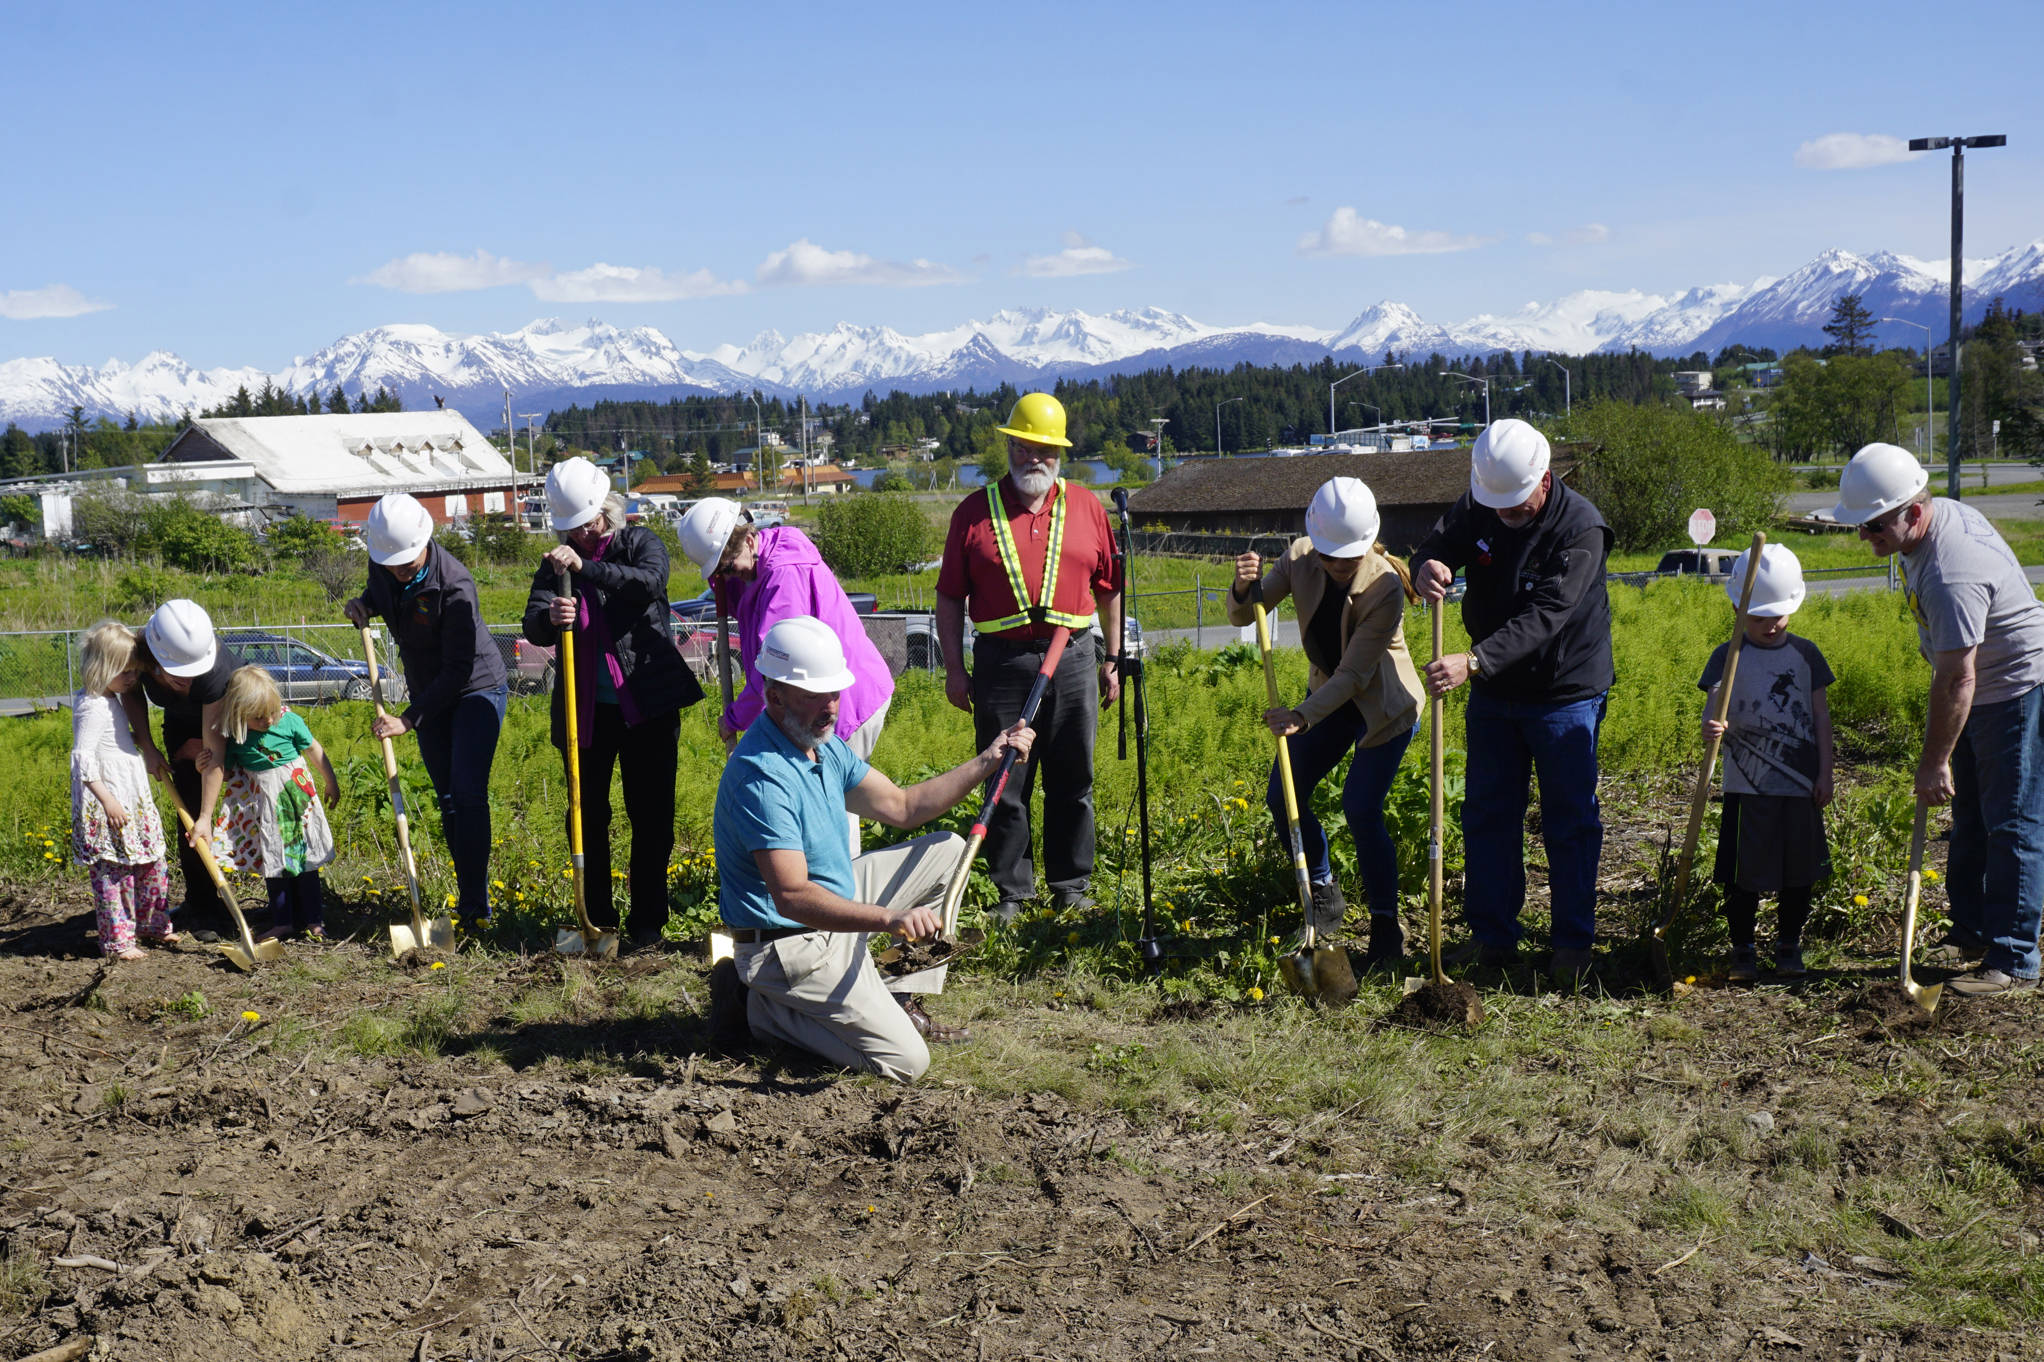 Former Homer Mayor Bryan Zak, in front, shovels dirt at the groundbreaking ceremony for the new Homer Police Station on Grubstake Avenue last Friday, May 24, 2019, in Homer, Alaska. From left to right are Homer City Council member Rachel Lord with her two children, Sadie and Linnea, council member Donna Aderhold, council member Shelly Erickson, council member Caroline Venuti, Mayor Ken Castner, Homer City Manager Katie Koester, and Byron Smith, son of council member Heath Smith, far right. (Photo by Michael Armstrong/Homer News)